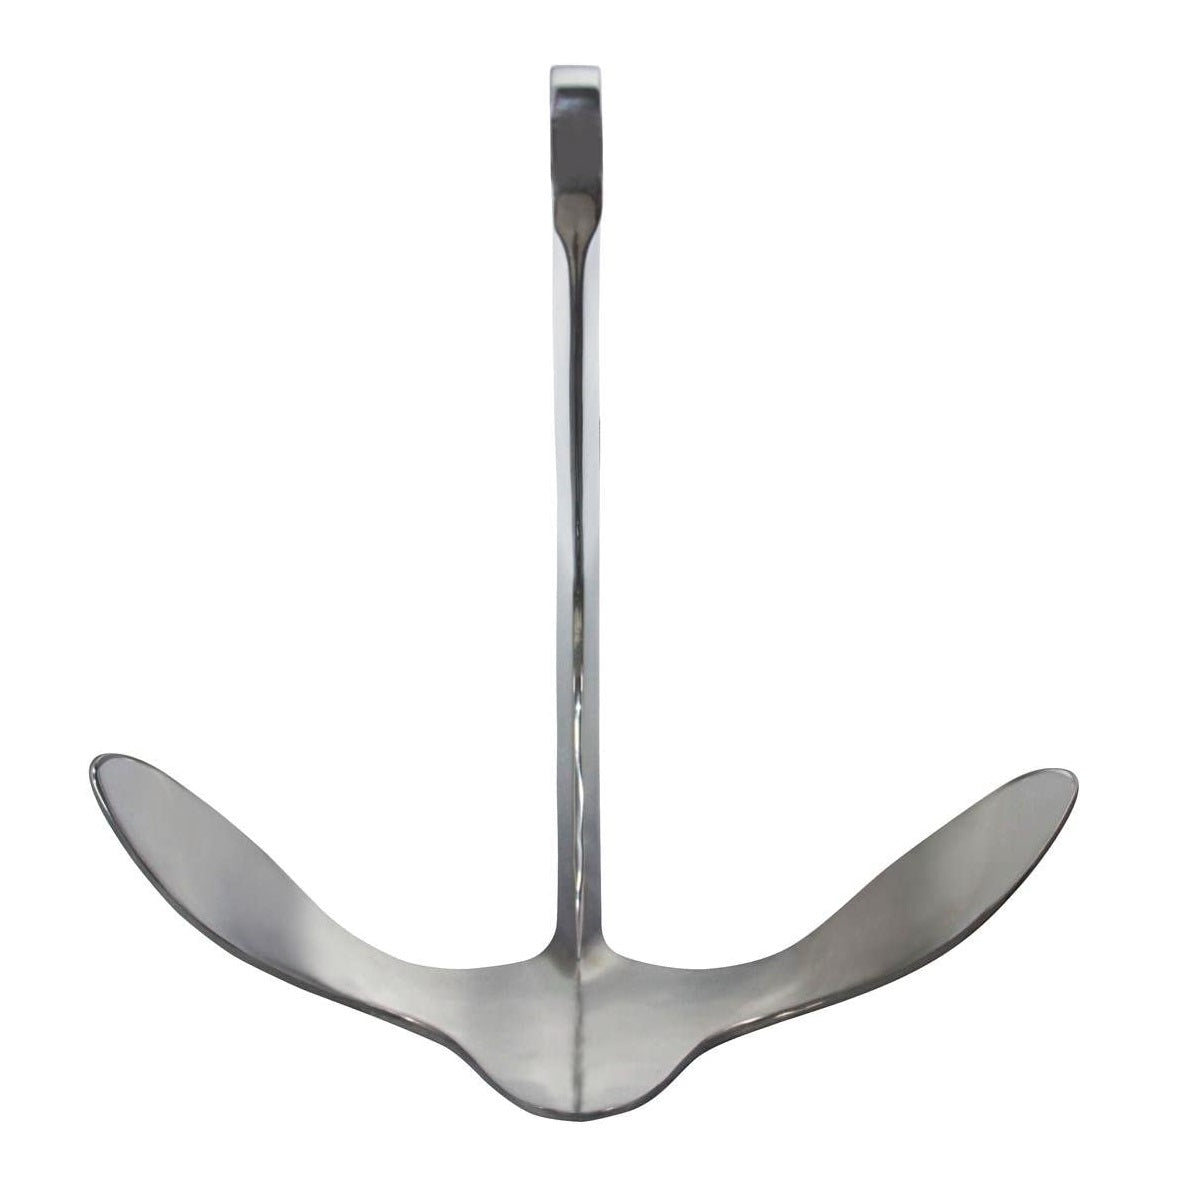 Bruce Anchor Stainless Steel